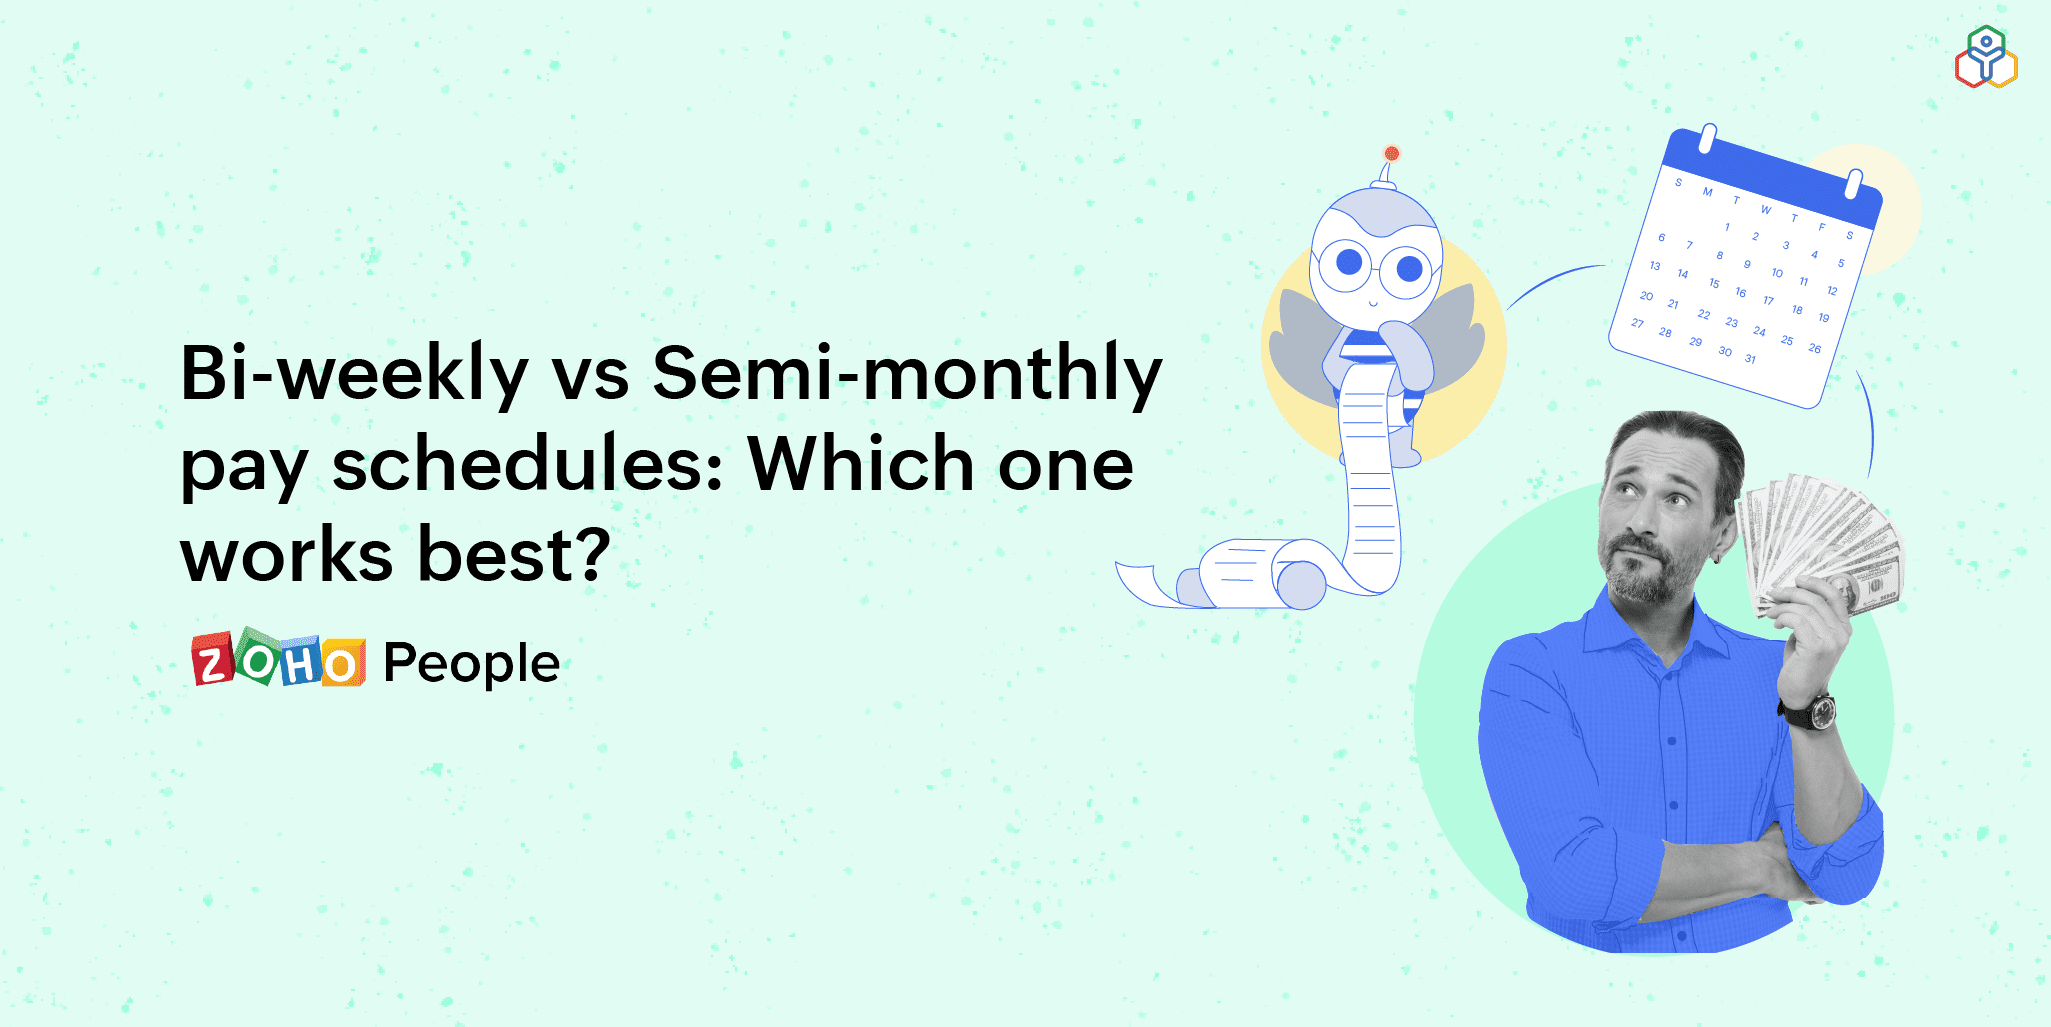 Pay Schedules - Semi-monthly VS Bi-weekly